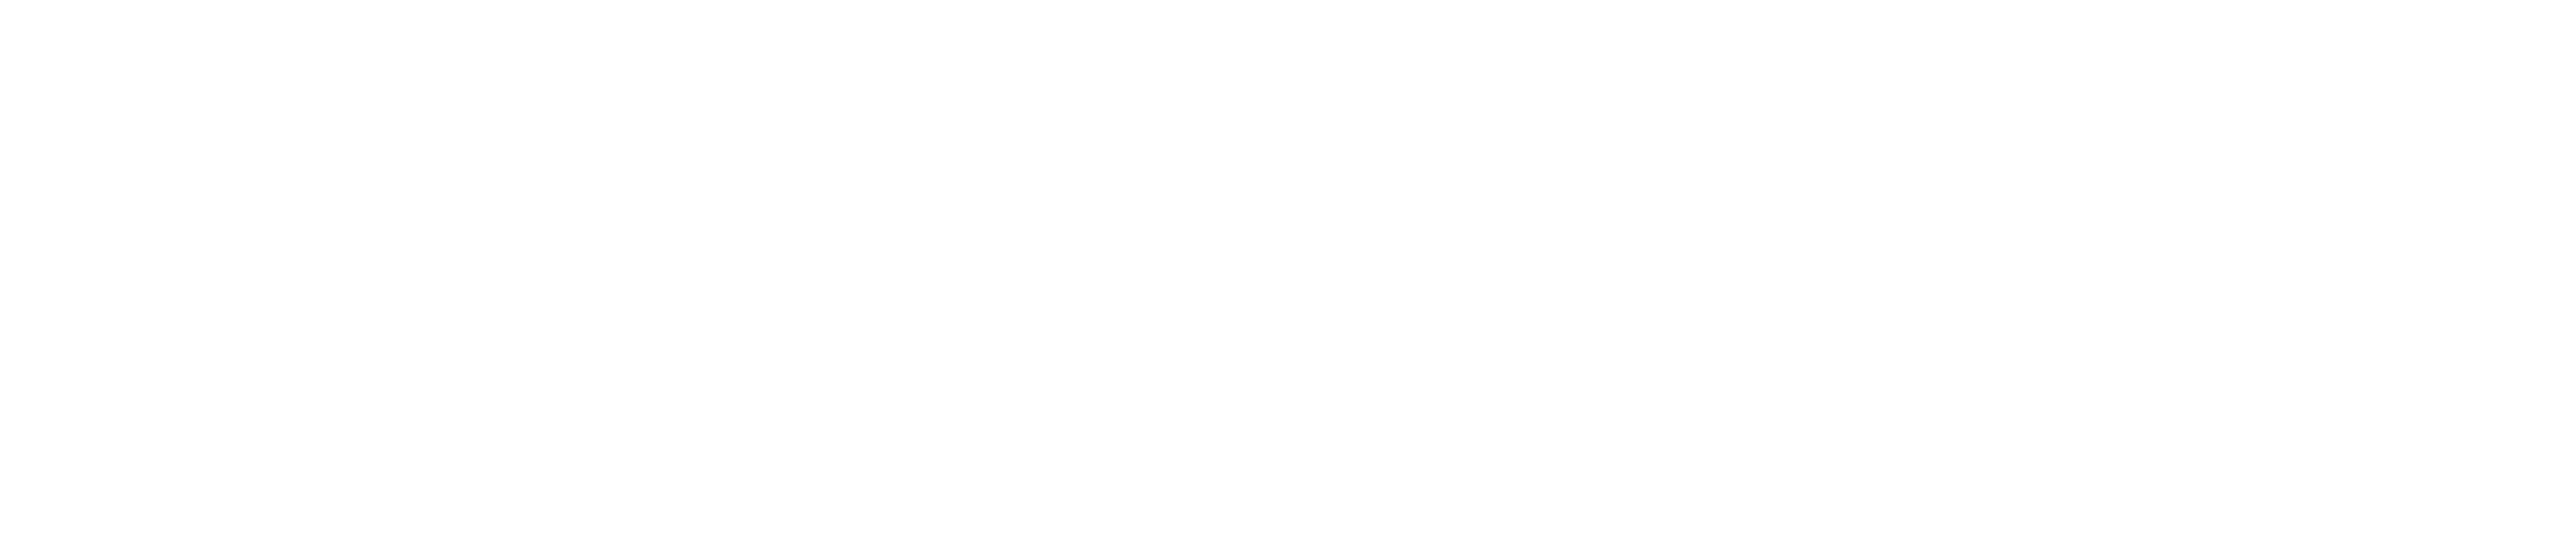 Scan-to-BIM Automation System (SBASE)